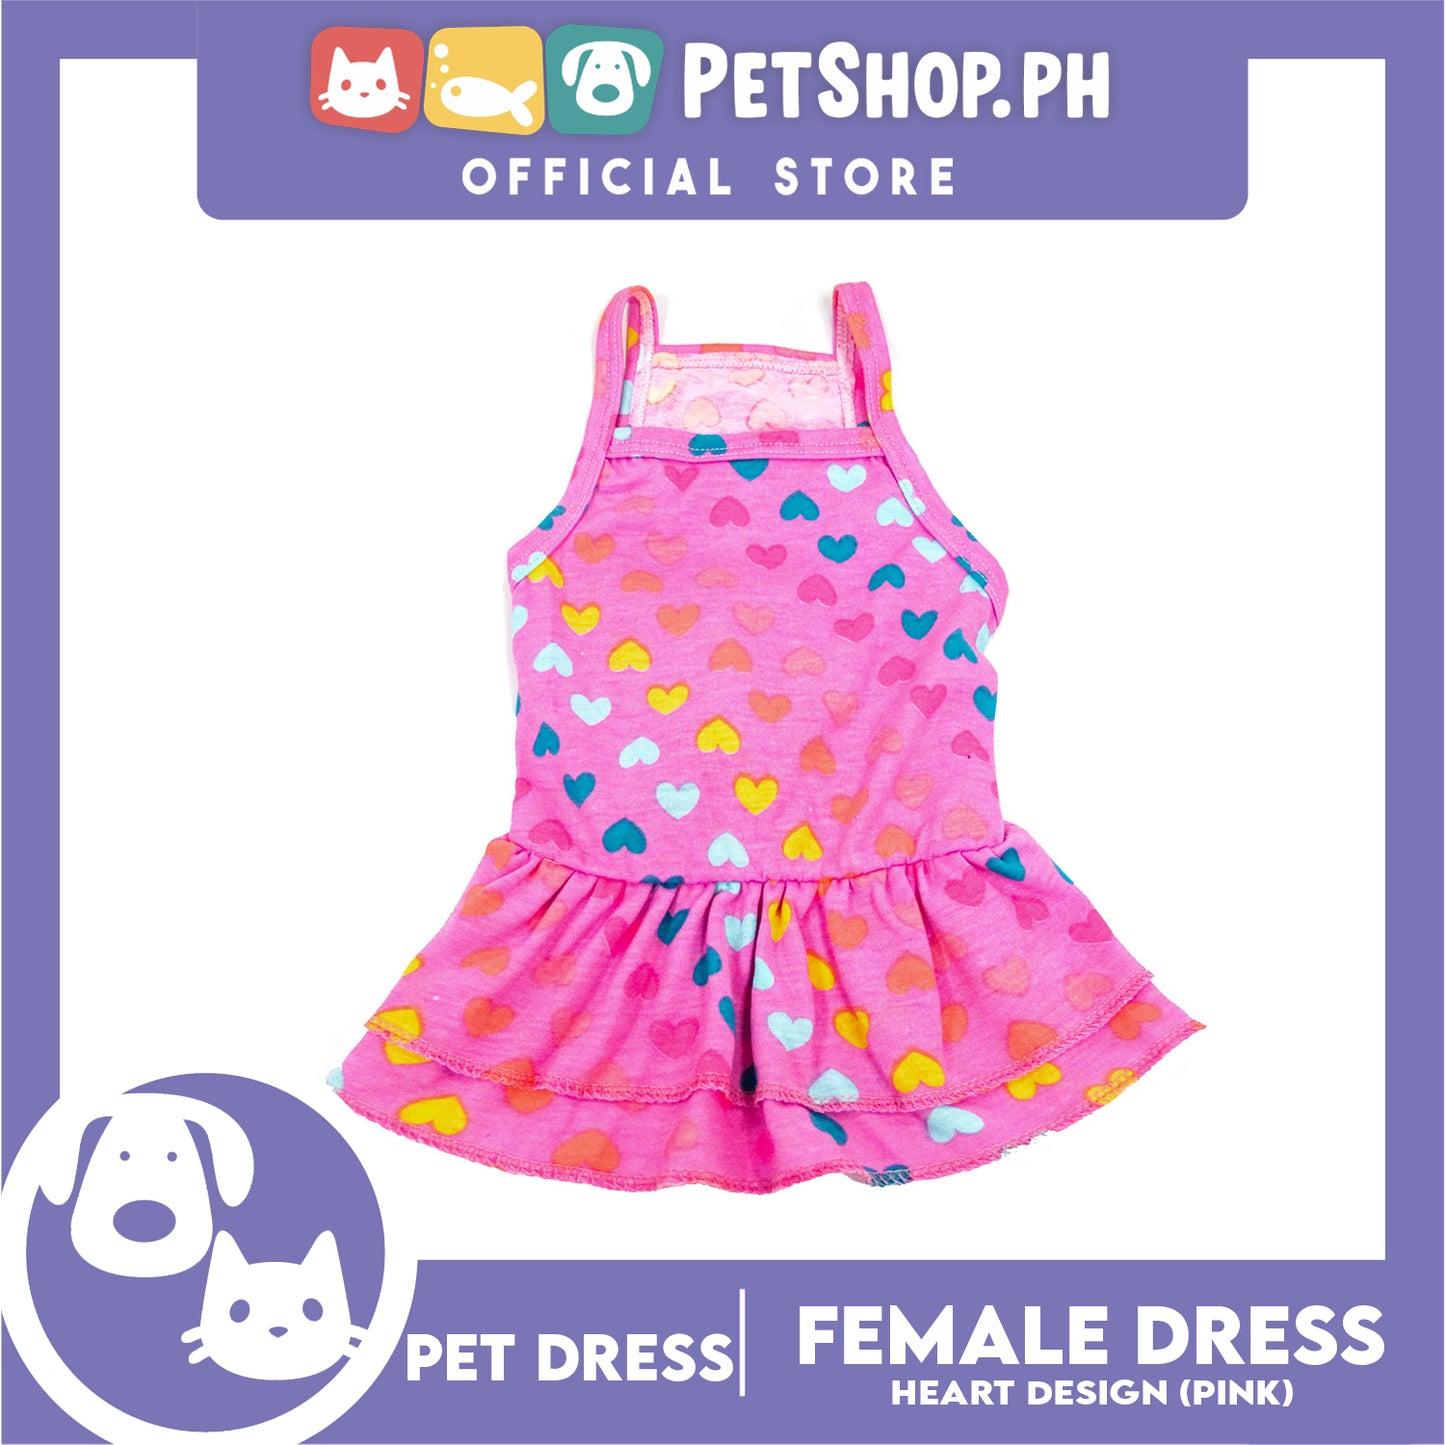 Pet Shirt Purple Dress Sando Shirt with Heart Design (Large) Perfect Fit for Dogs and Cats Cloth